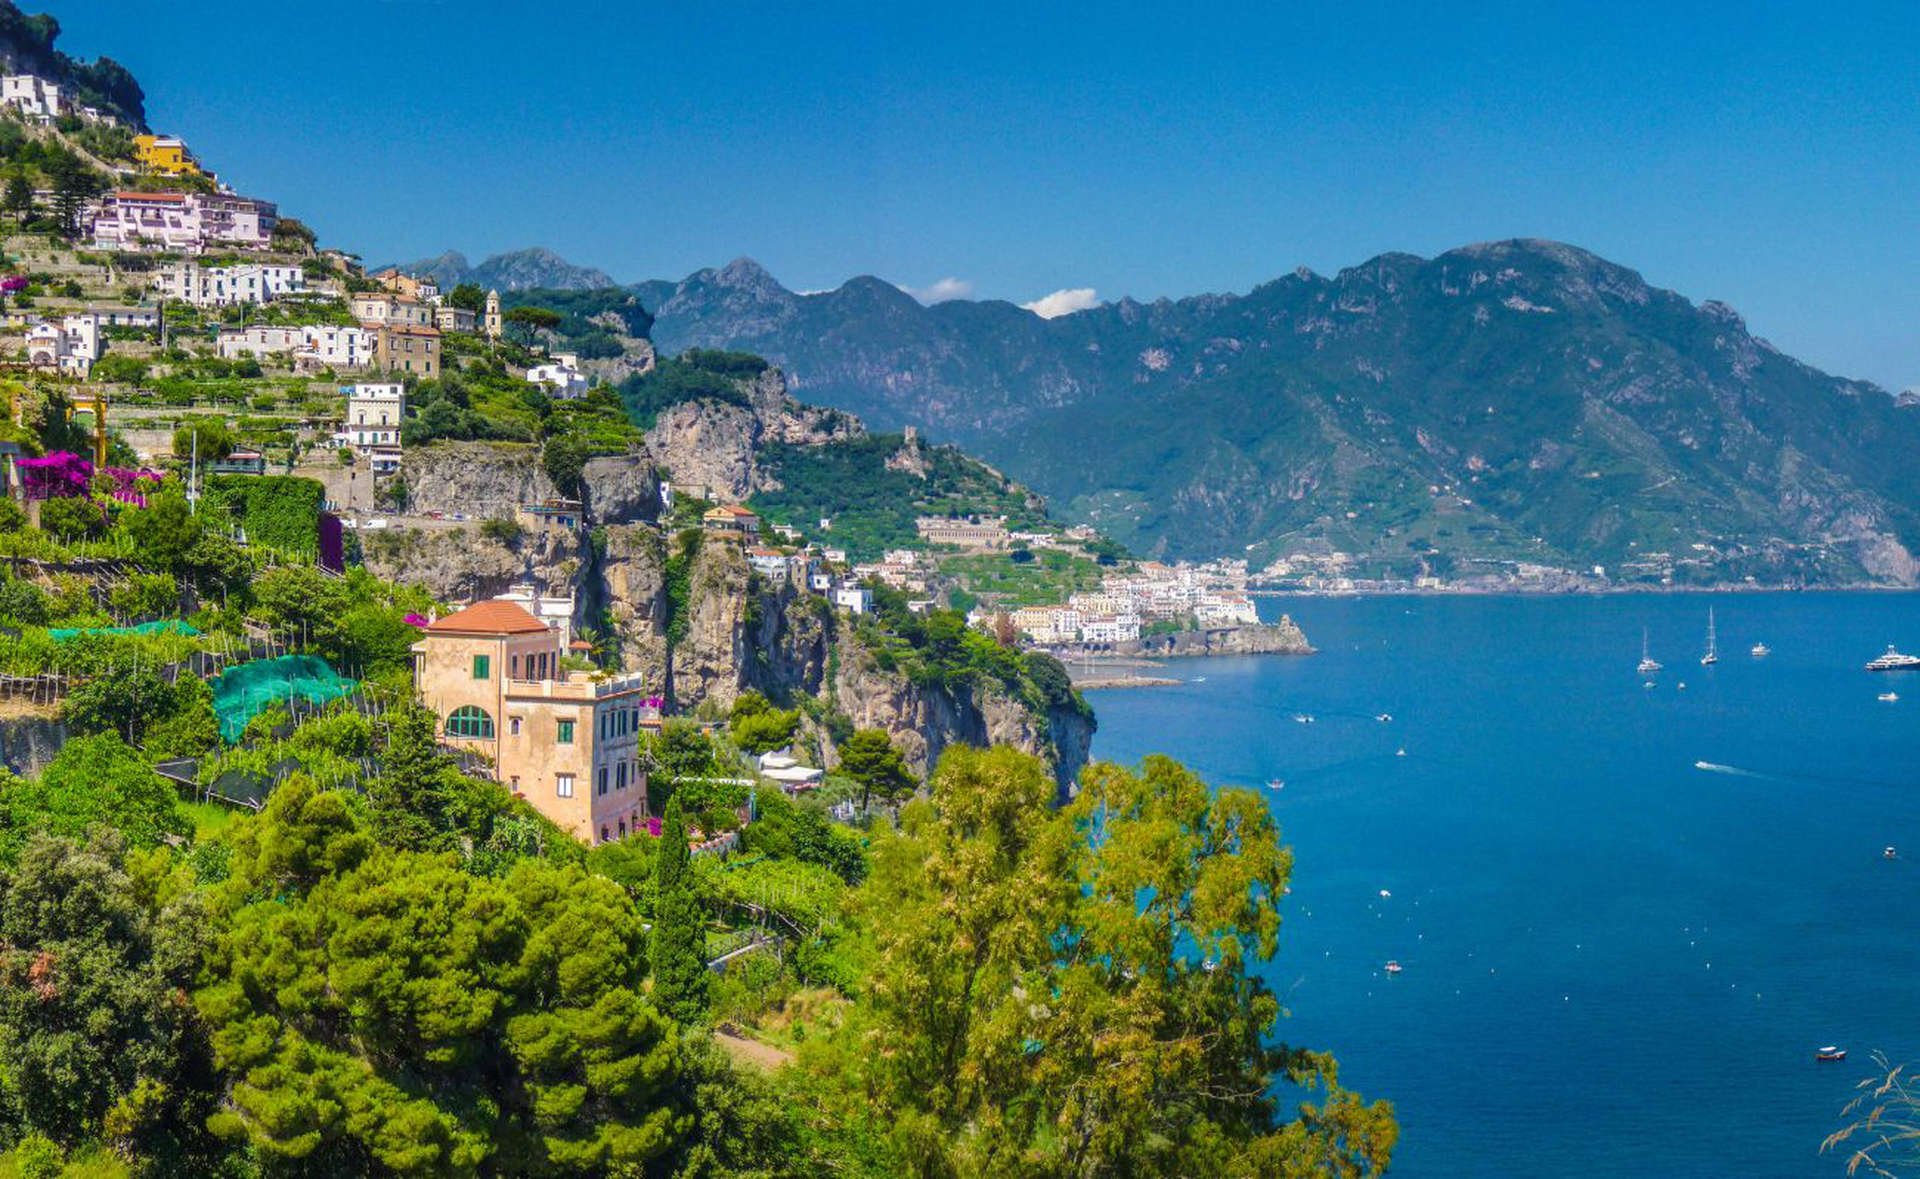 Picturesque landscape of Italy overlooking the water